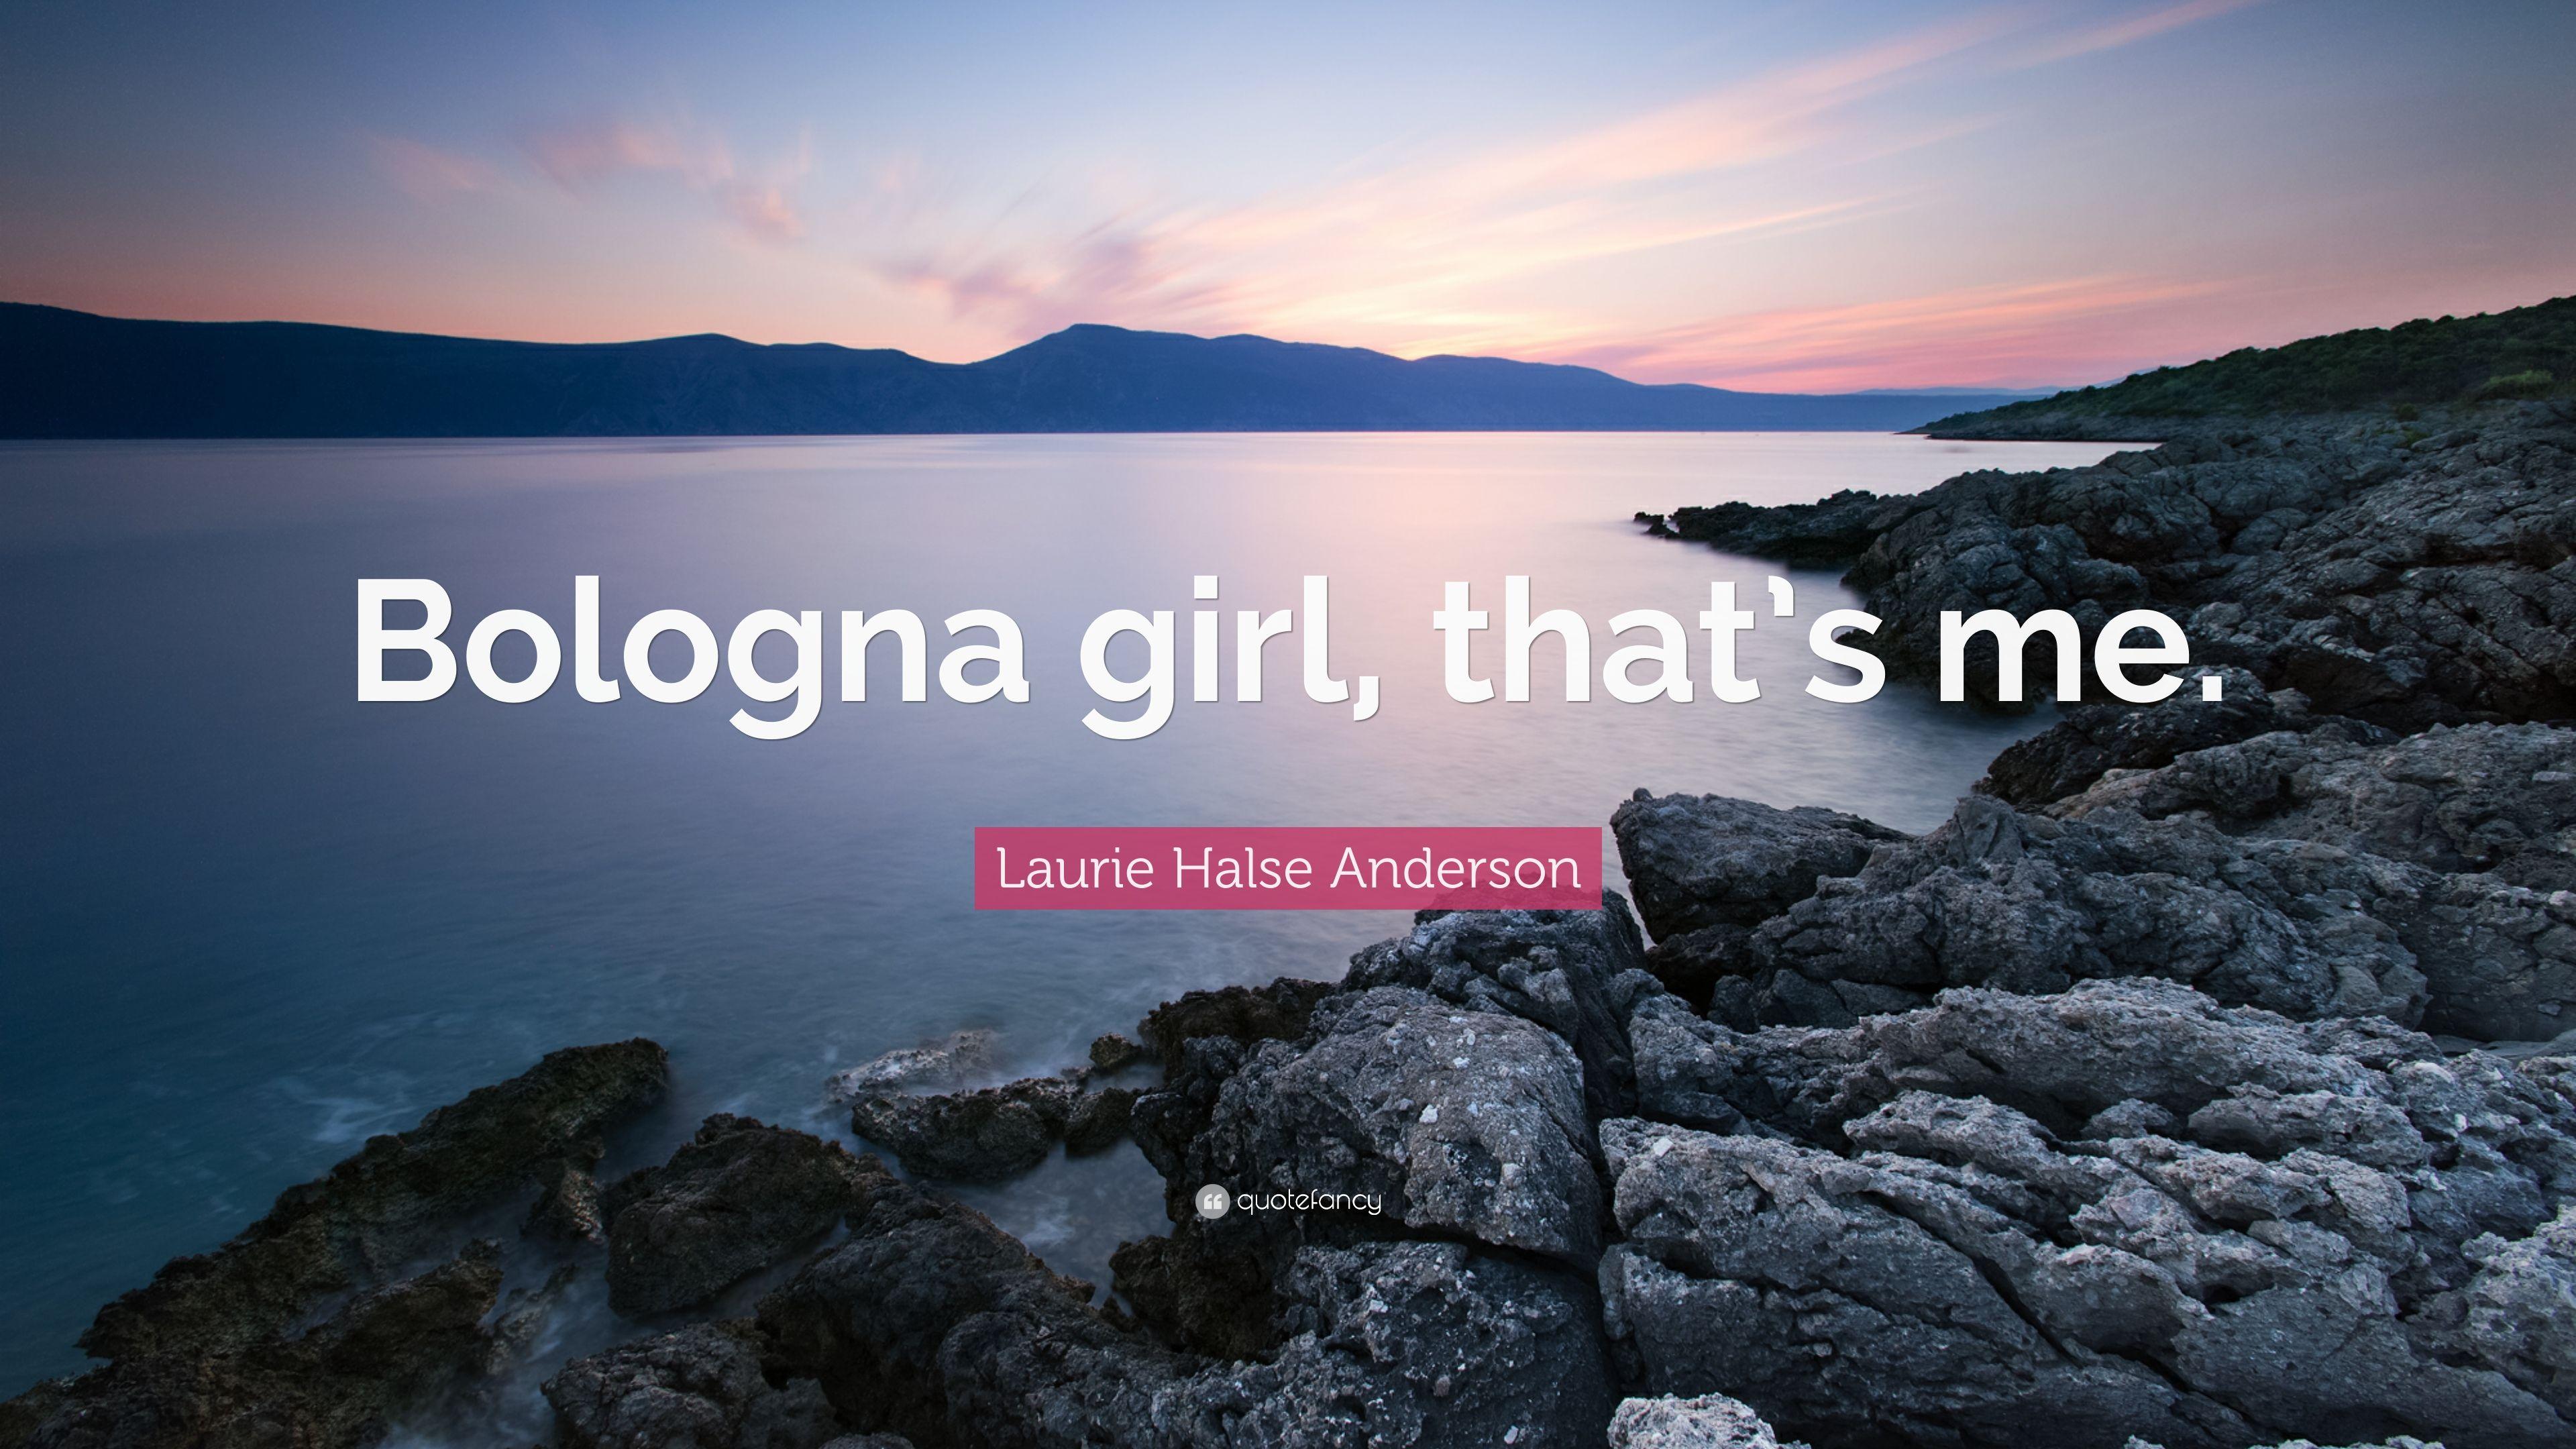 Laurie Halse Anderson Quote: “Bologna girl, that's me.” 6